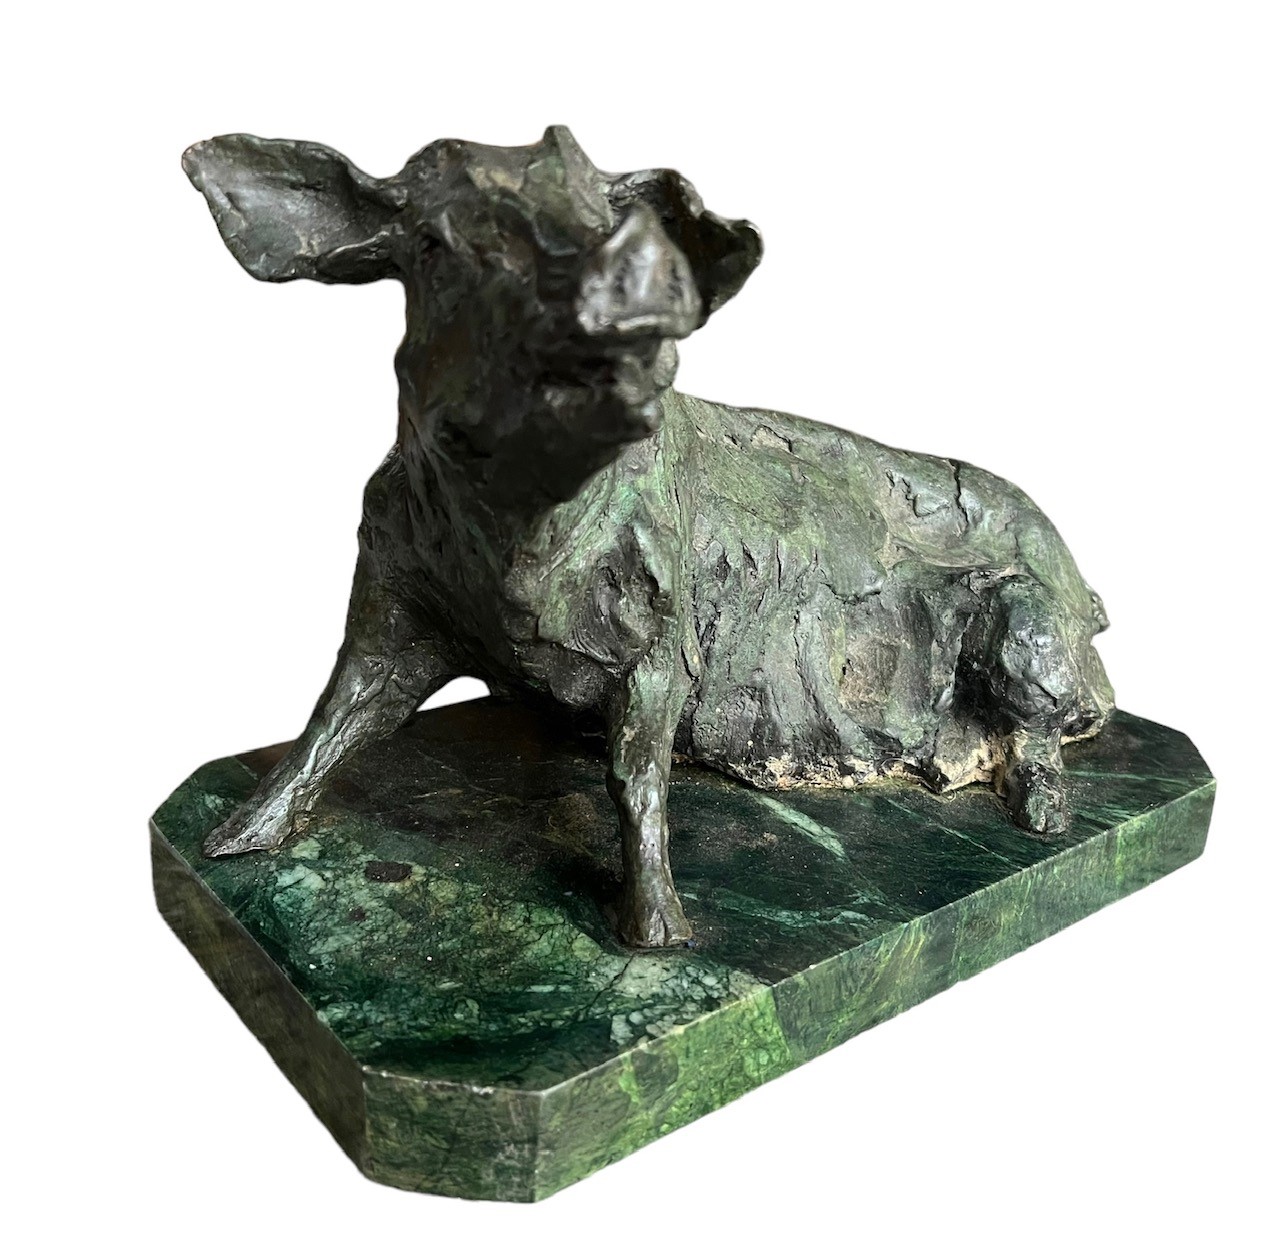 A DECORATIVE 20TH CENTURY BRONZE SCULPTURE OF A SEATED PIG Raised on a marble plinth base, - Image 2 of 8